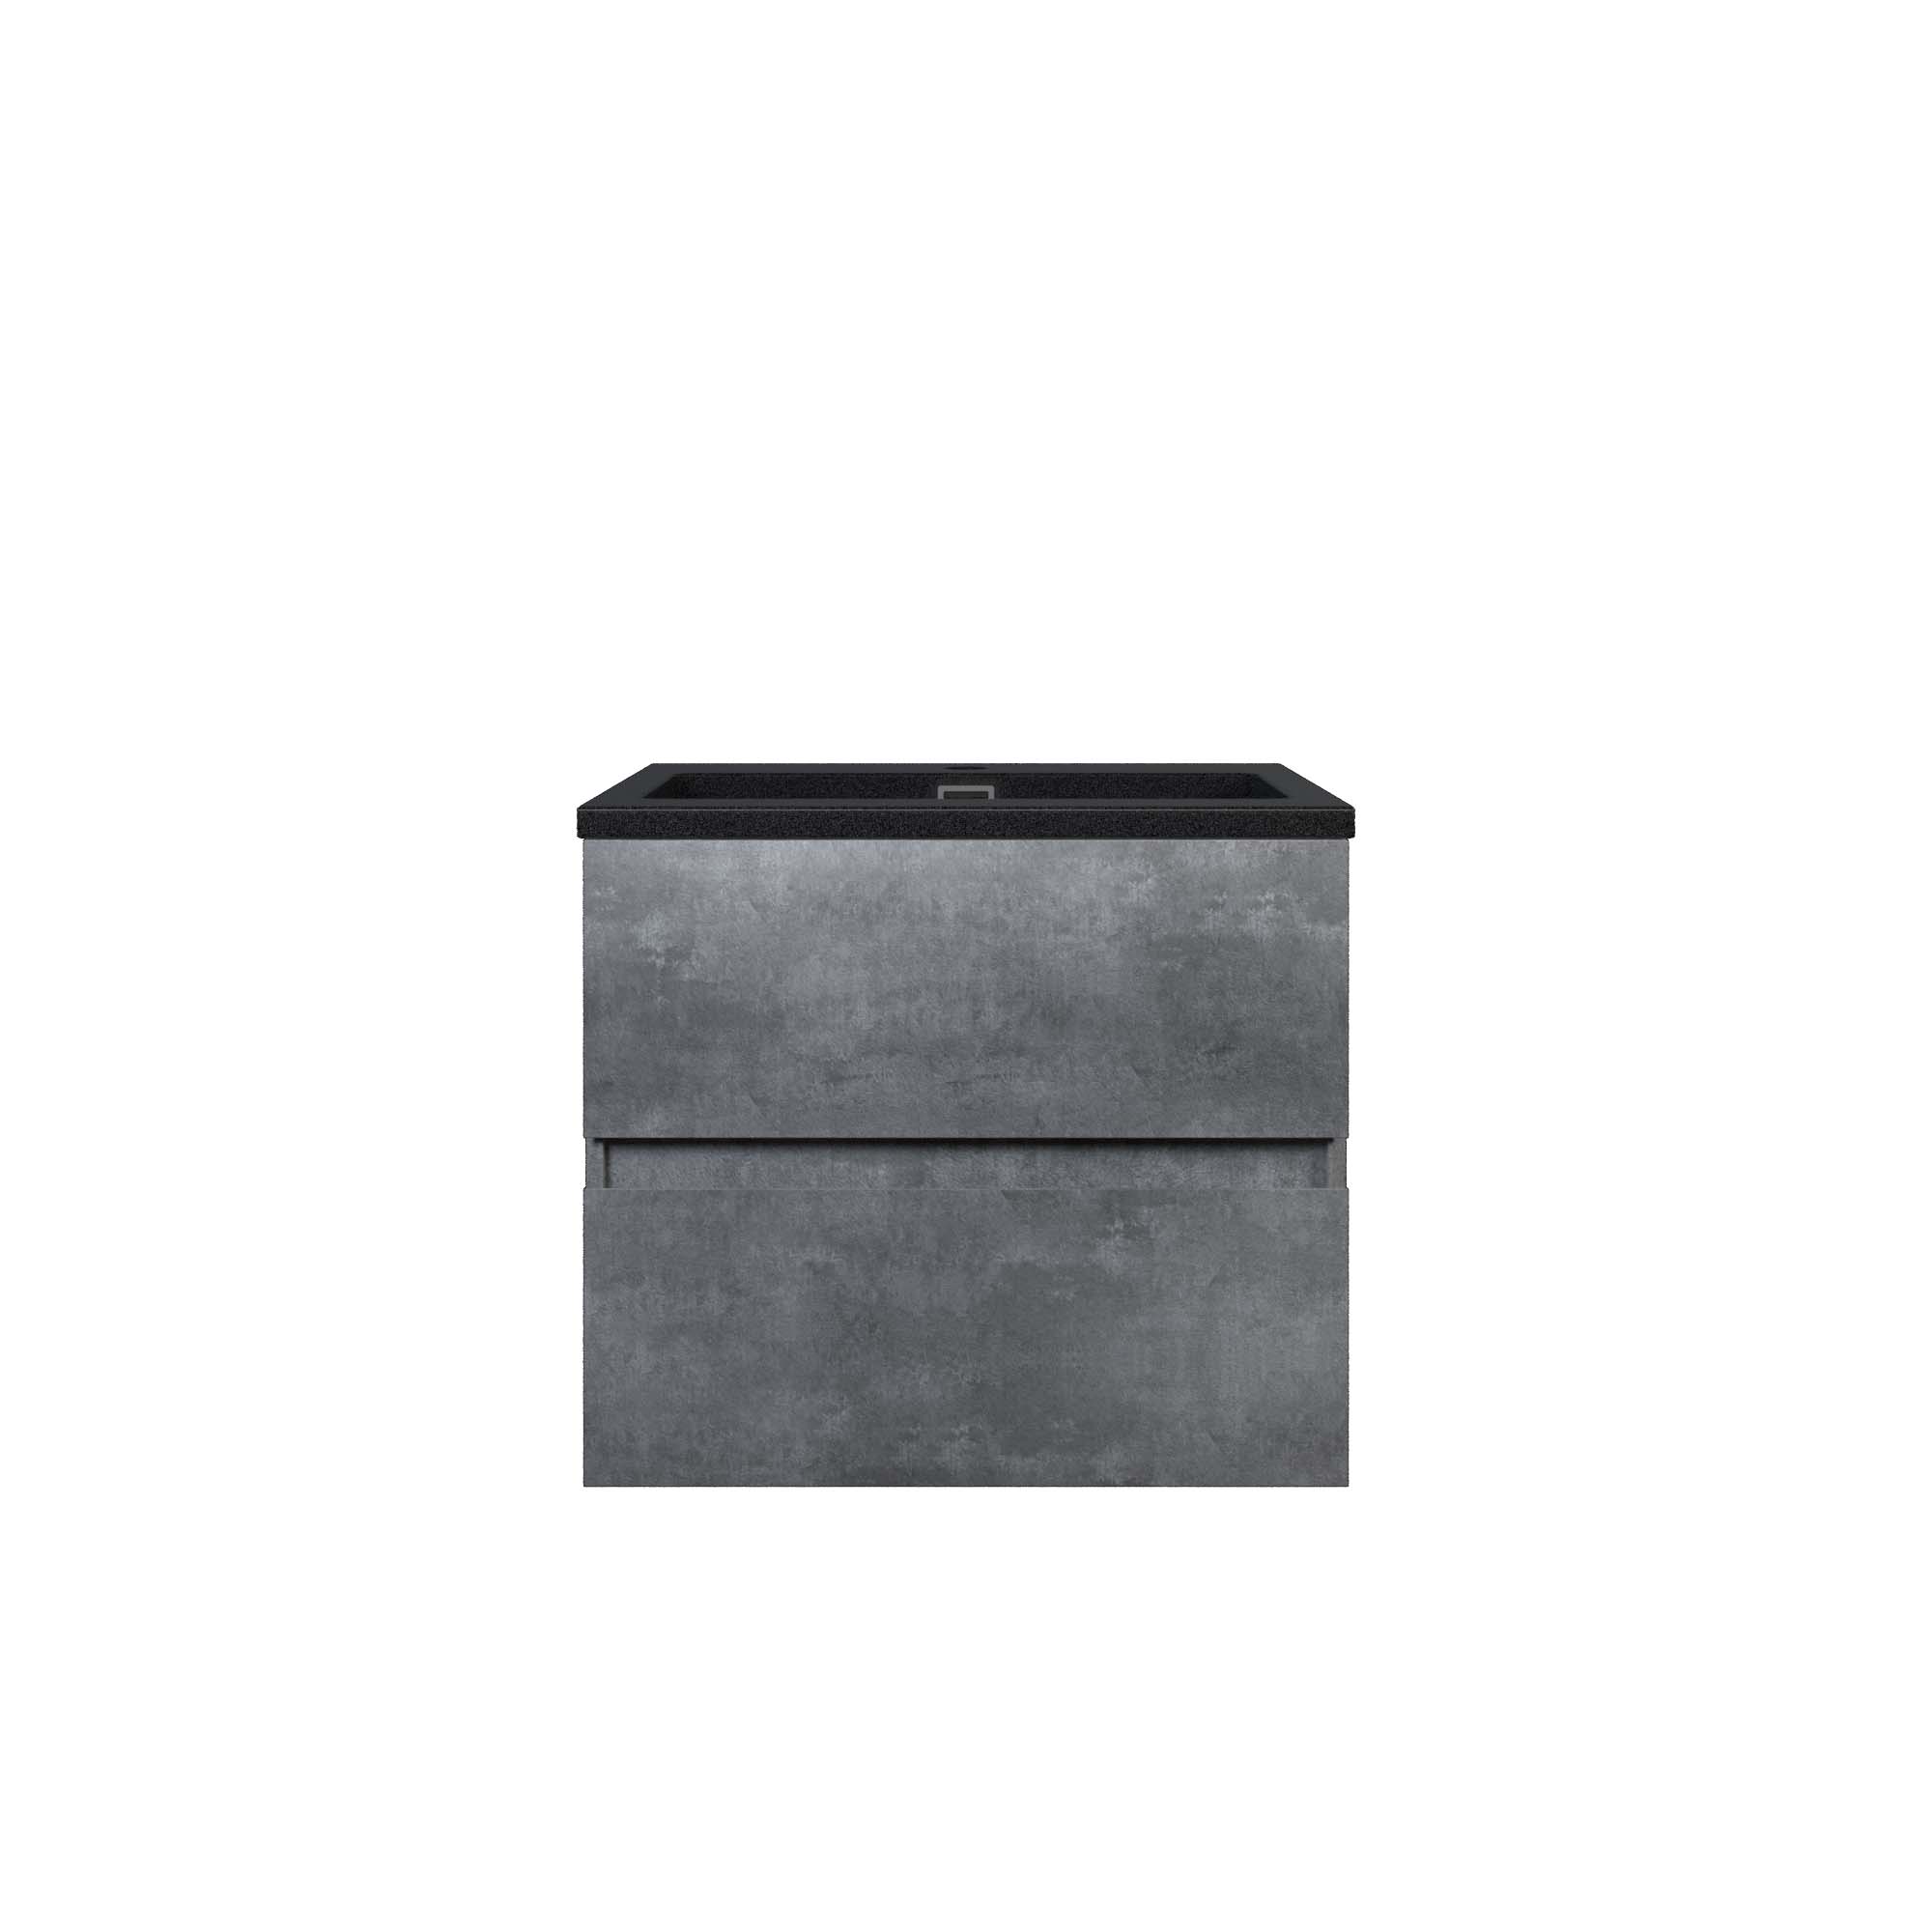  WOODBRIDGE 24 in. W x 18-7/8 in. D Contemporary Wall Hung Floating Vanity in Gray with Quartz Sand Composite Vanity Top in Black with matching finish sink._12699